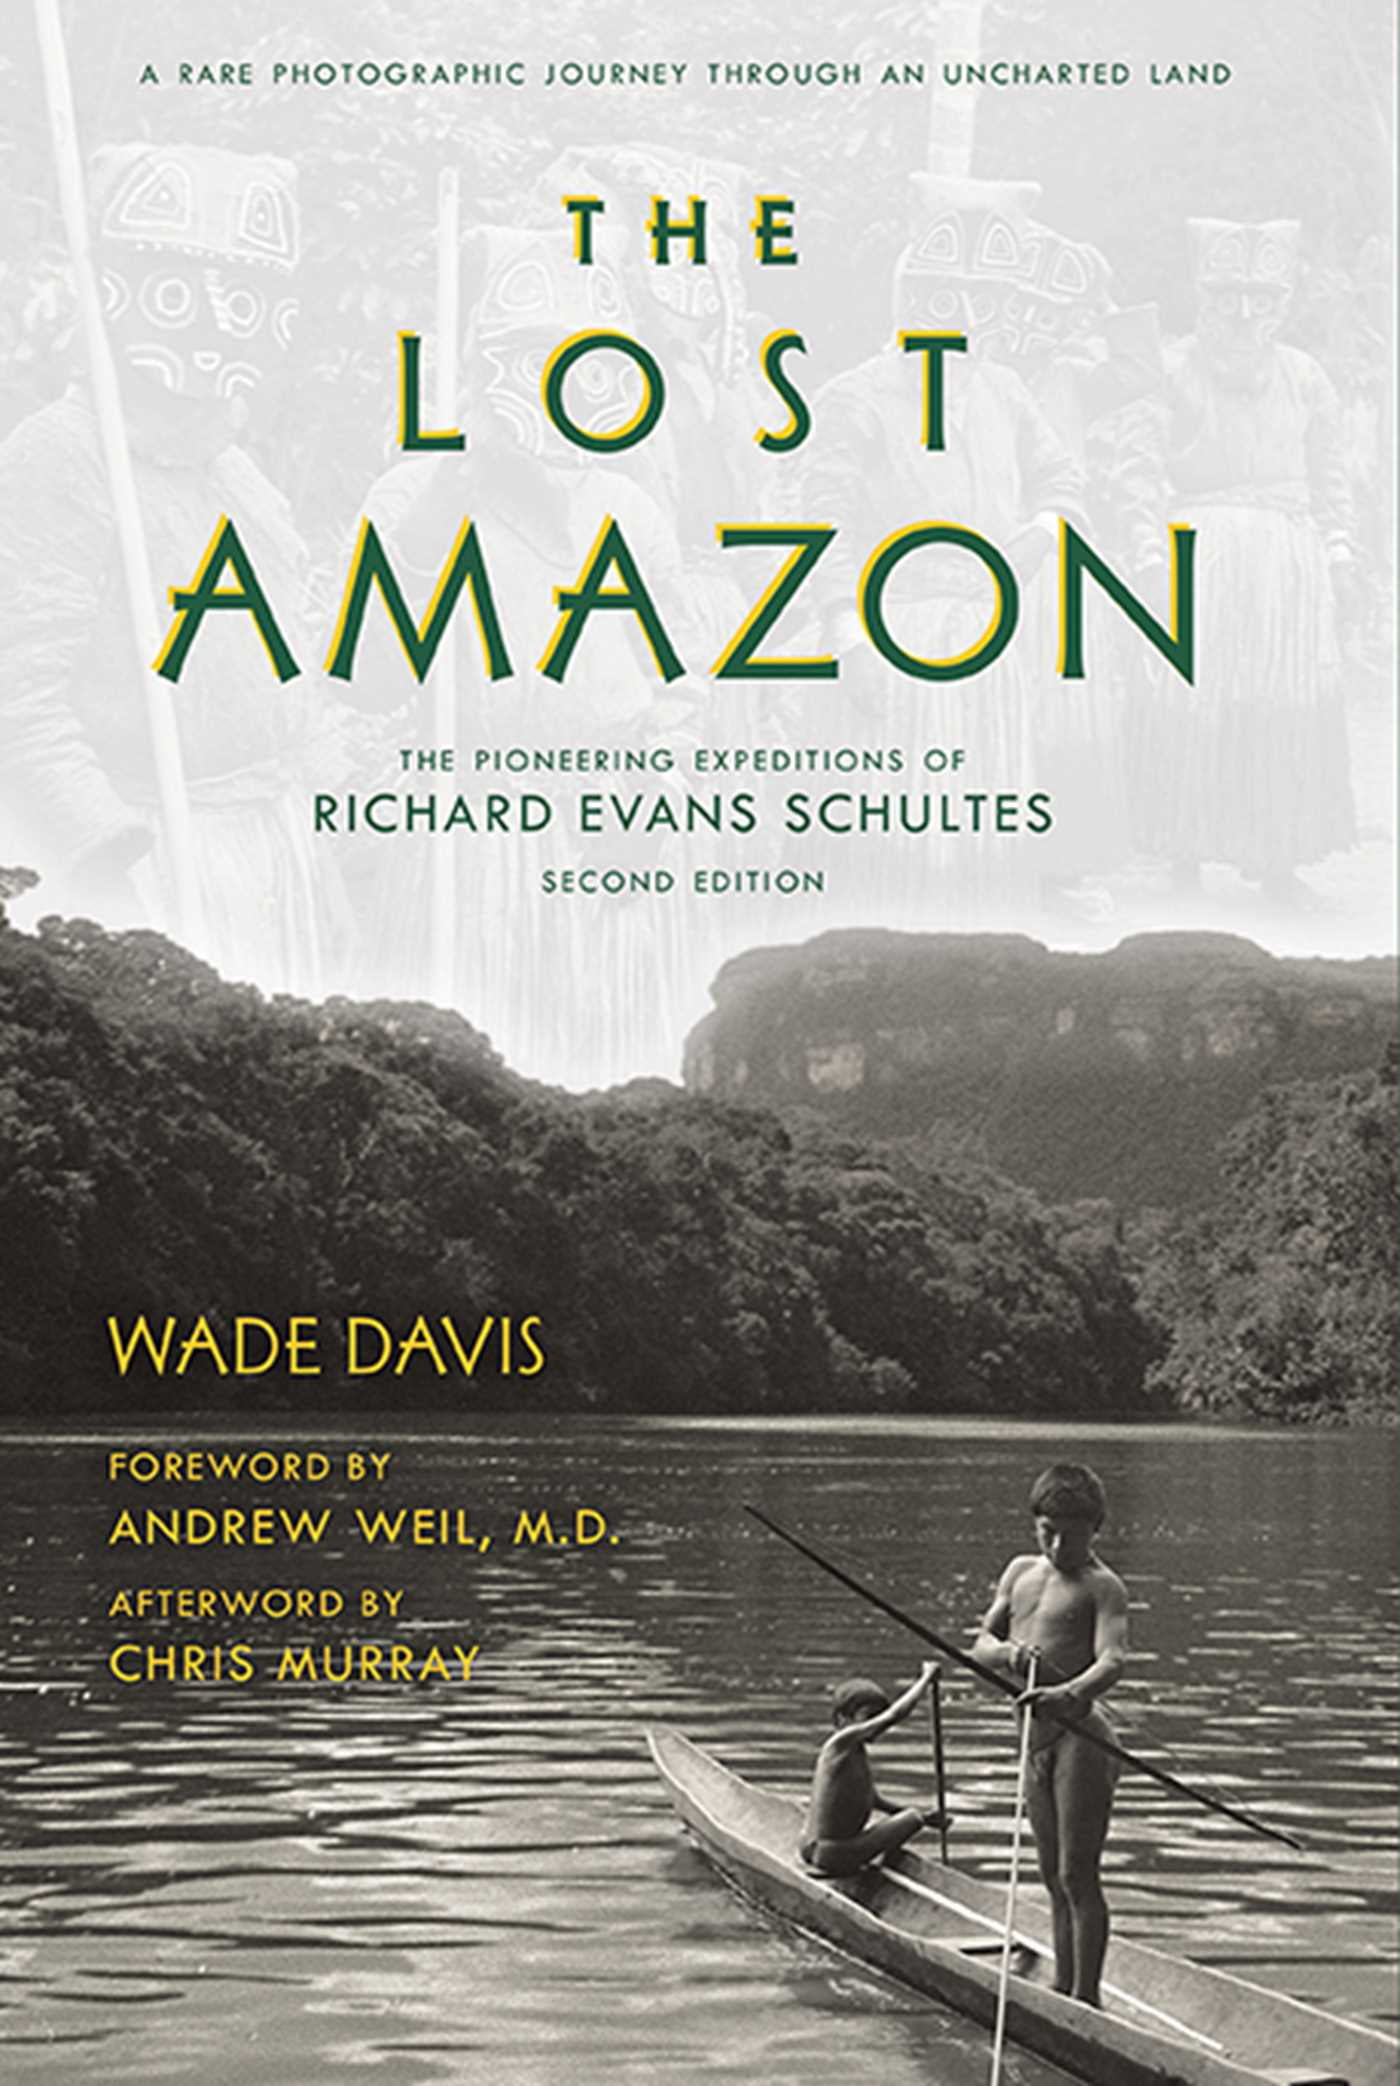 The Lost Amazon The Pioneering Expeditions of Richard Evans Schultes
Epub-Ebook